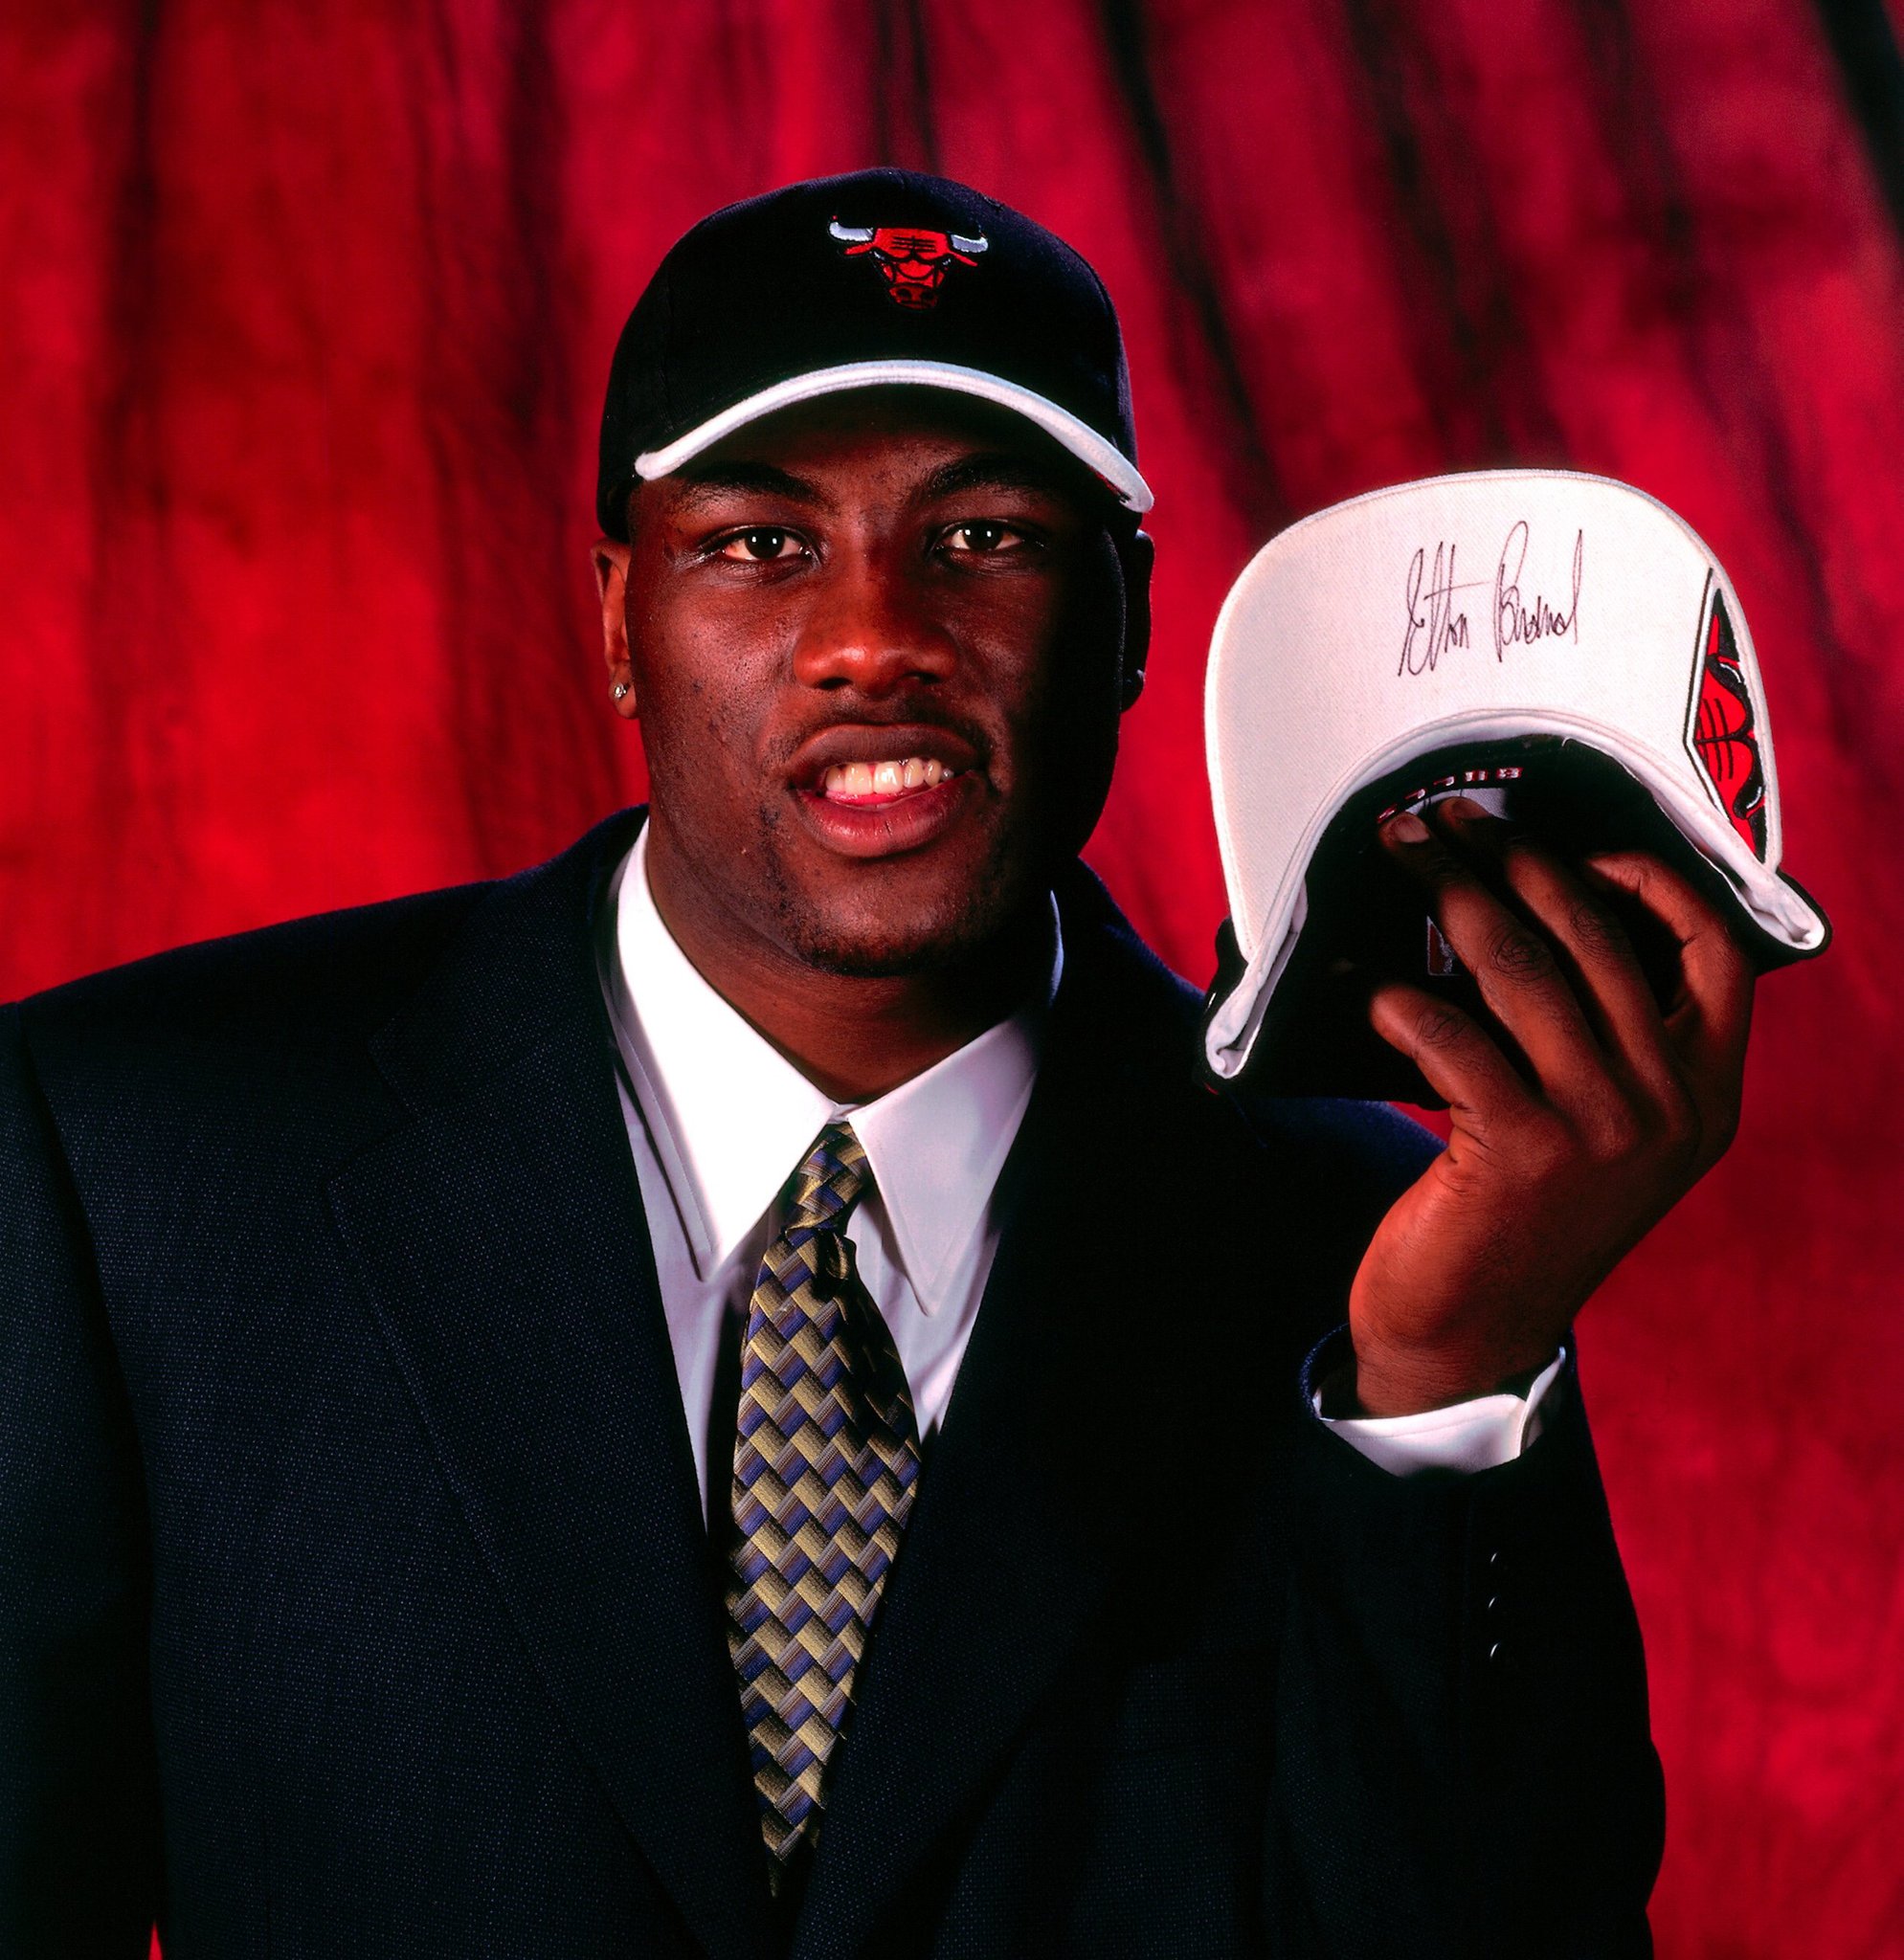 CBS Sports HQ on X: 21 years ago today, the 1999 NBA Draft class